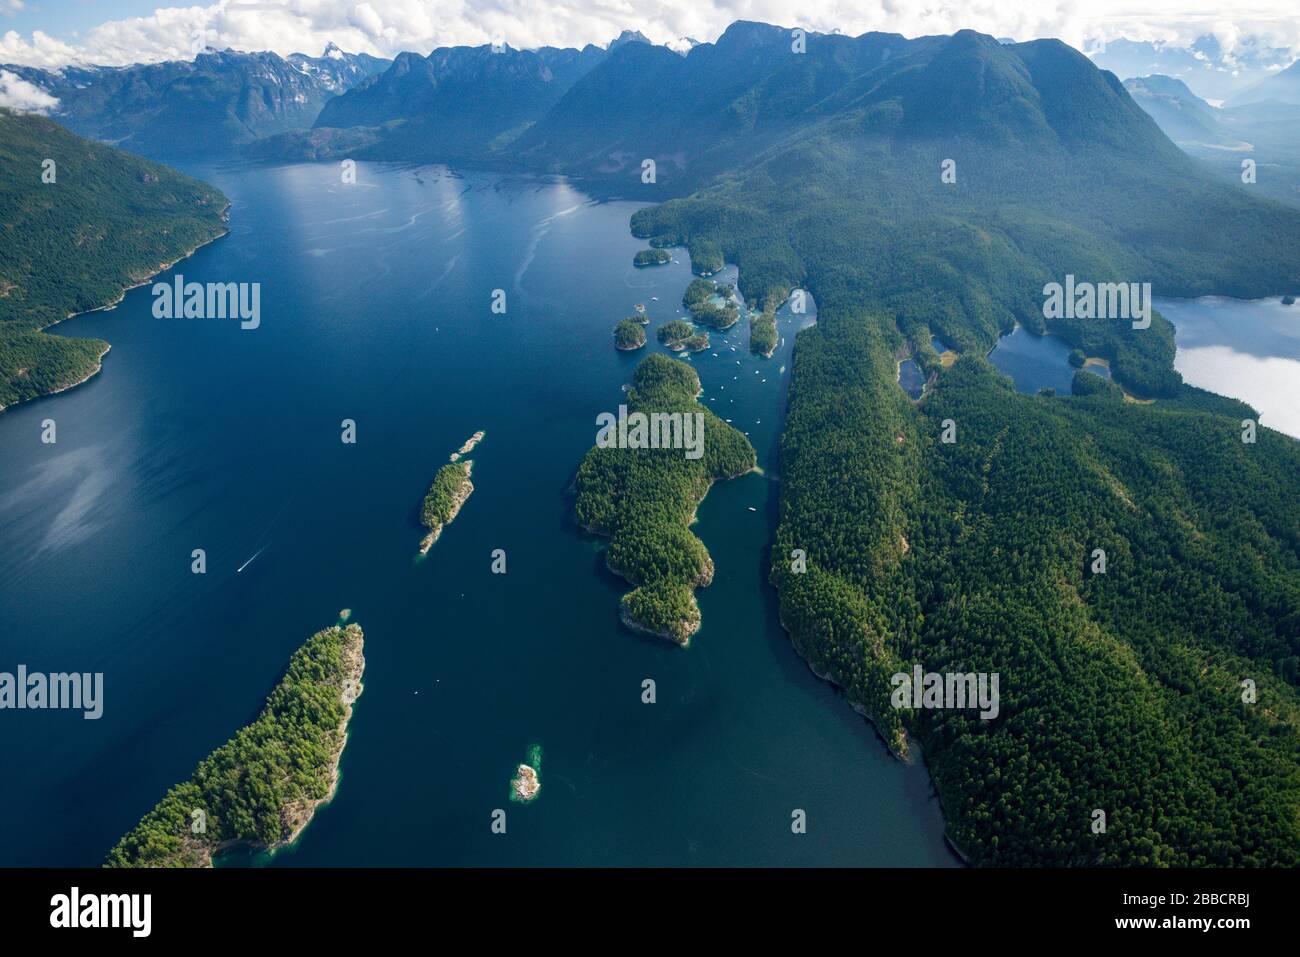 An aerial view of Desolation Sound, British Columbia, Canada Stock Photo